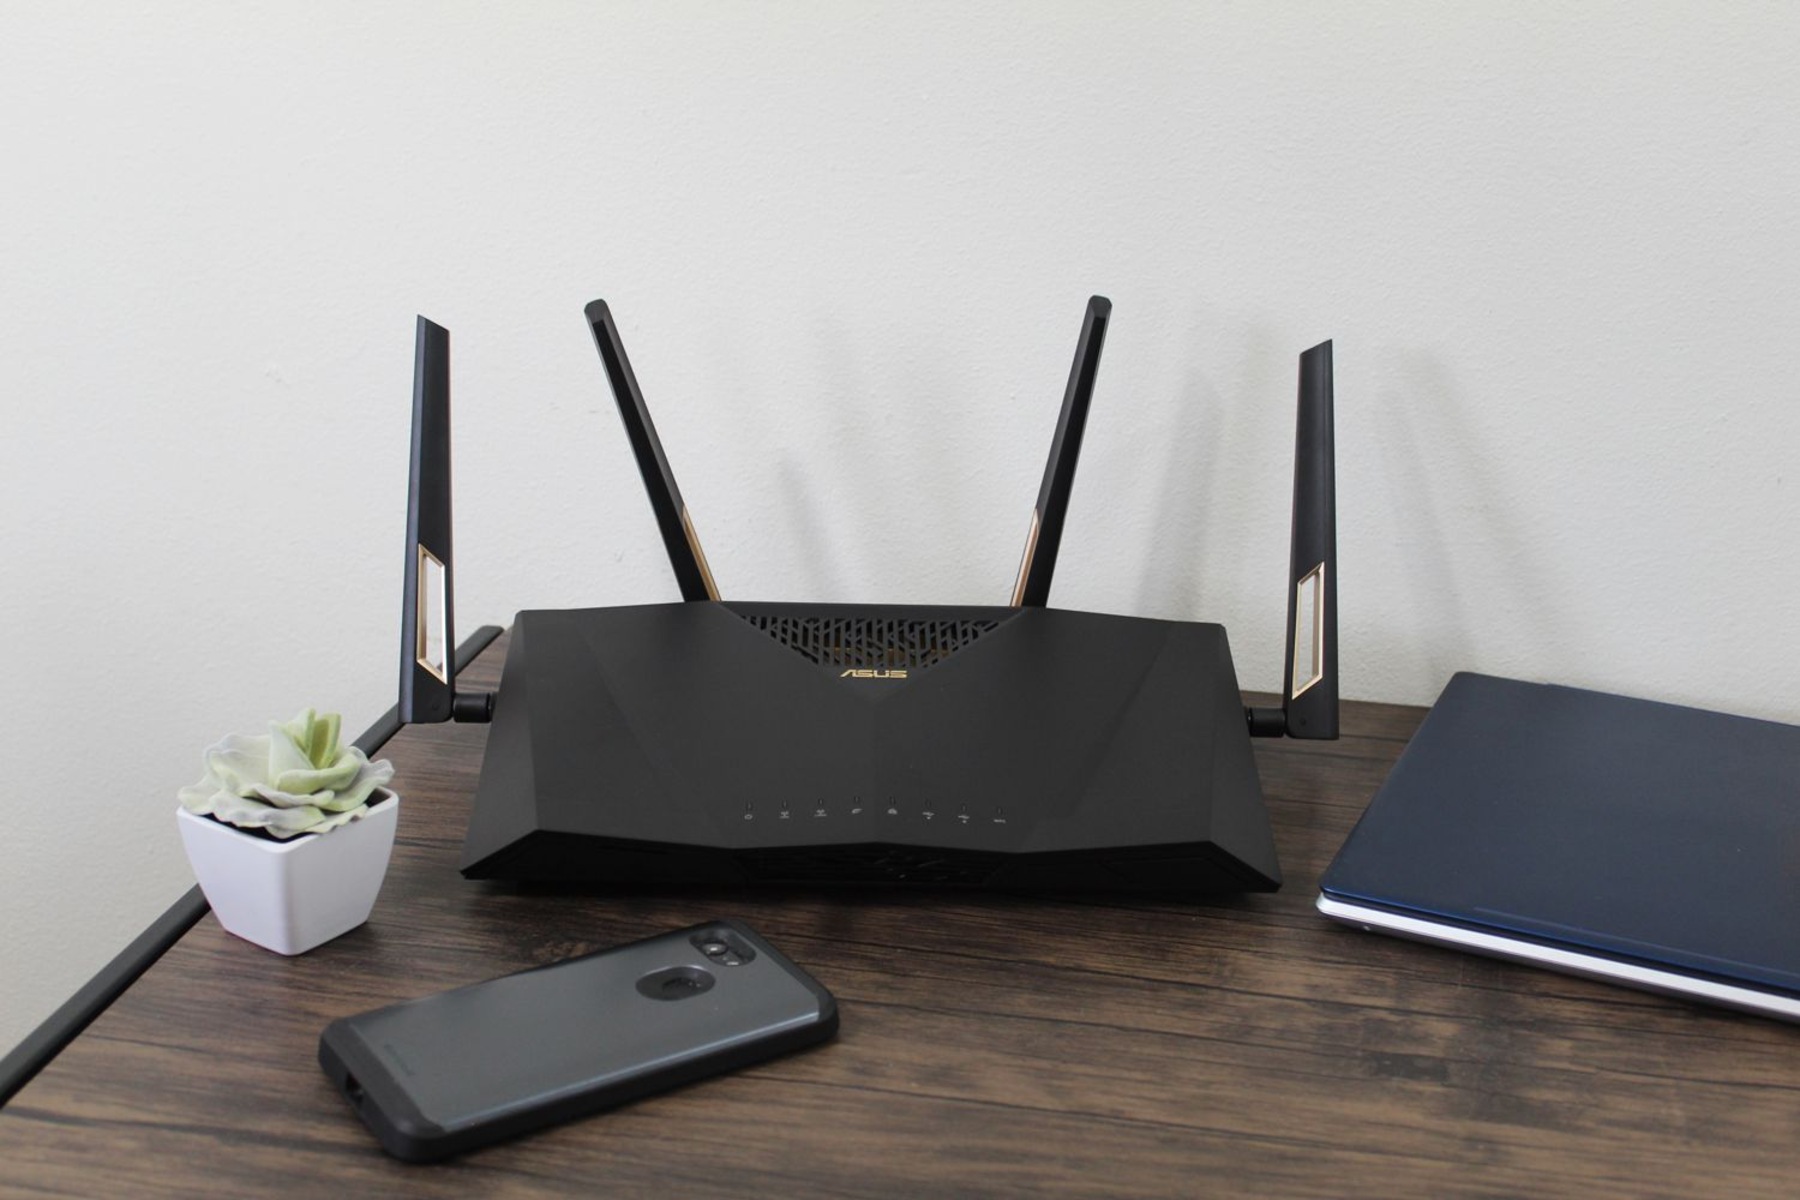 How Much Speed Do You Lose With A Wireless Router